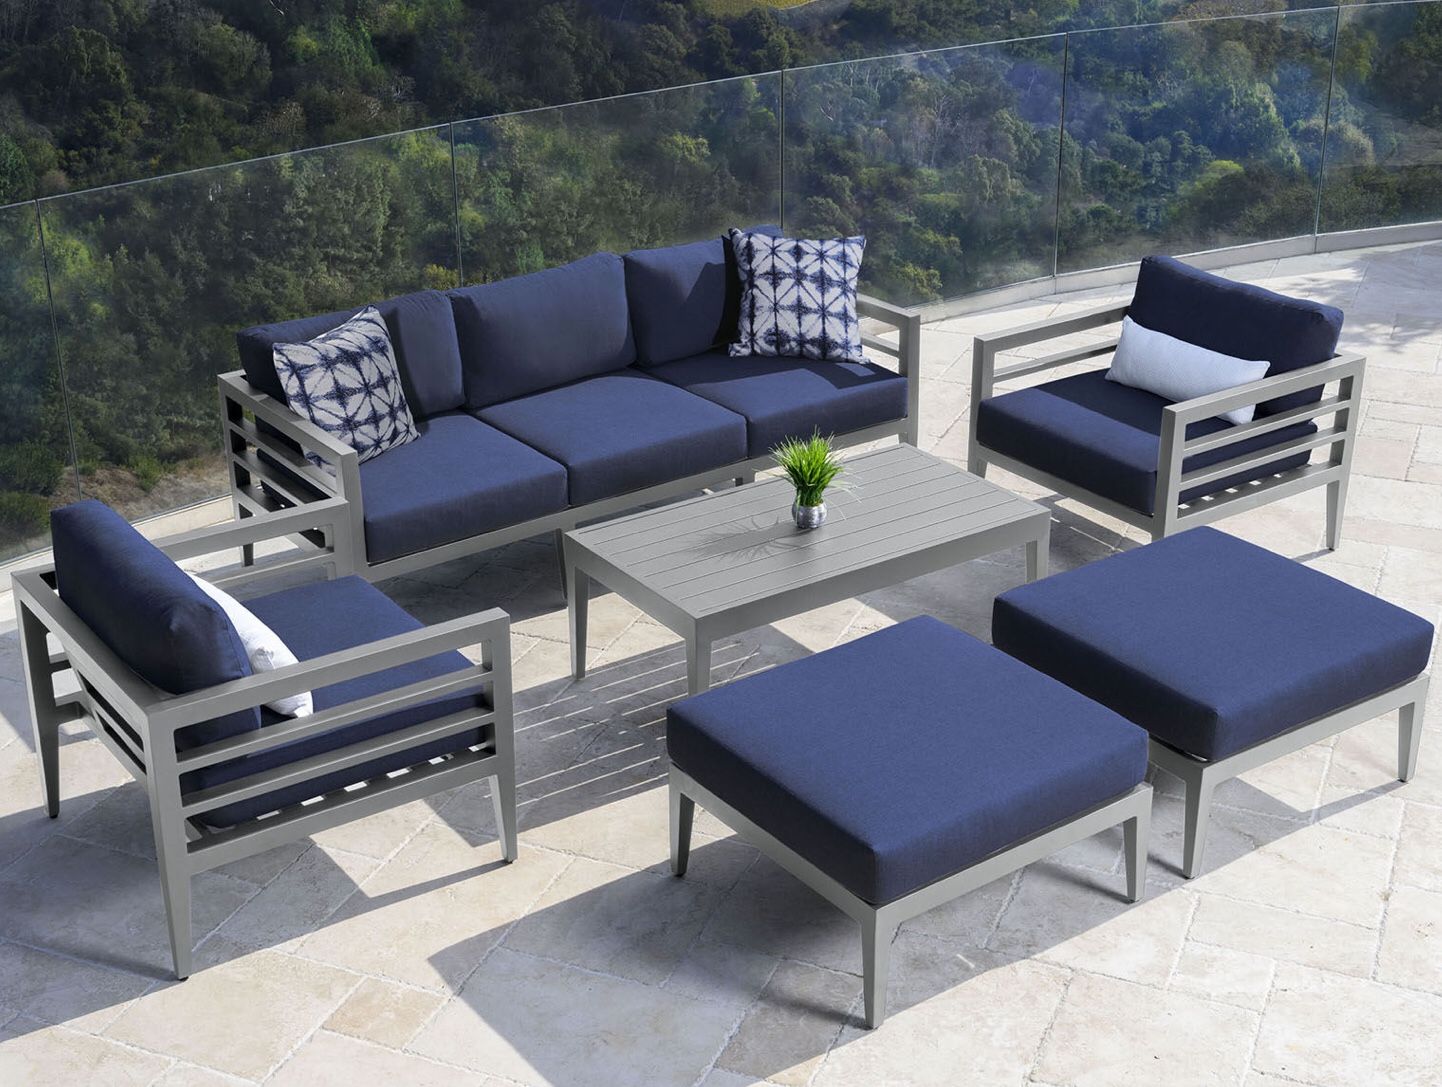 Furniture for the outdoor 7pc seating set by Abbyson Living